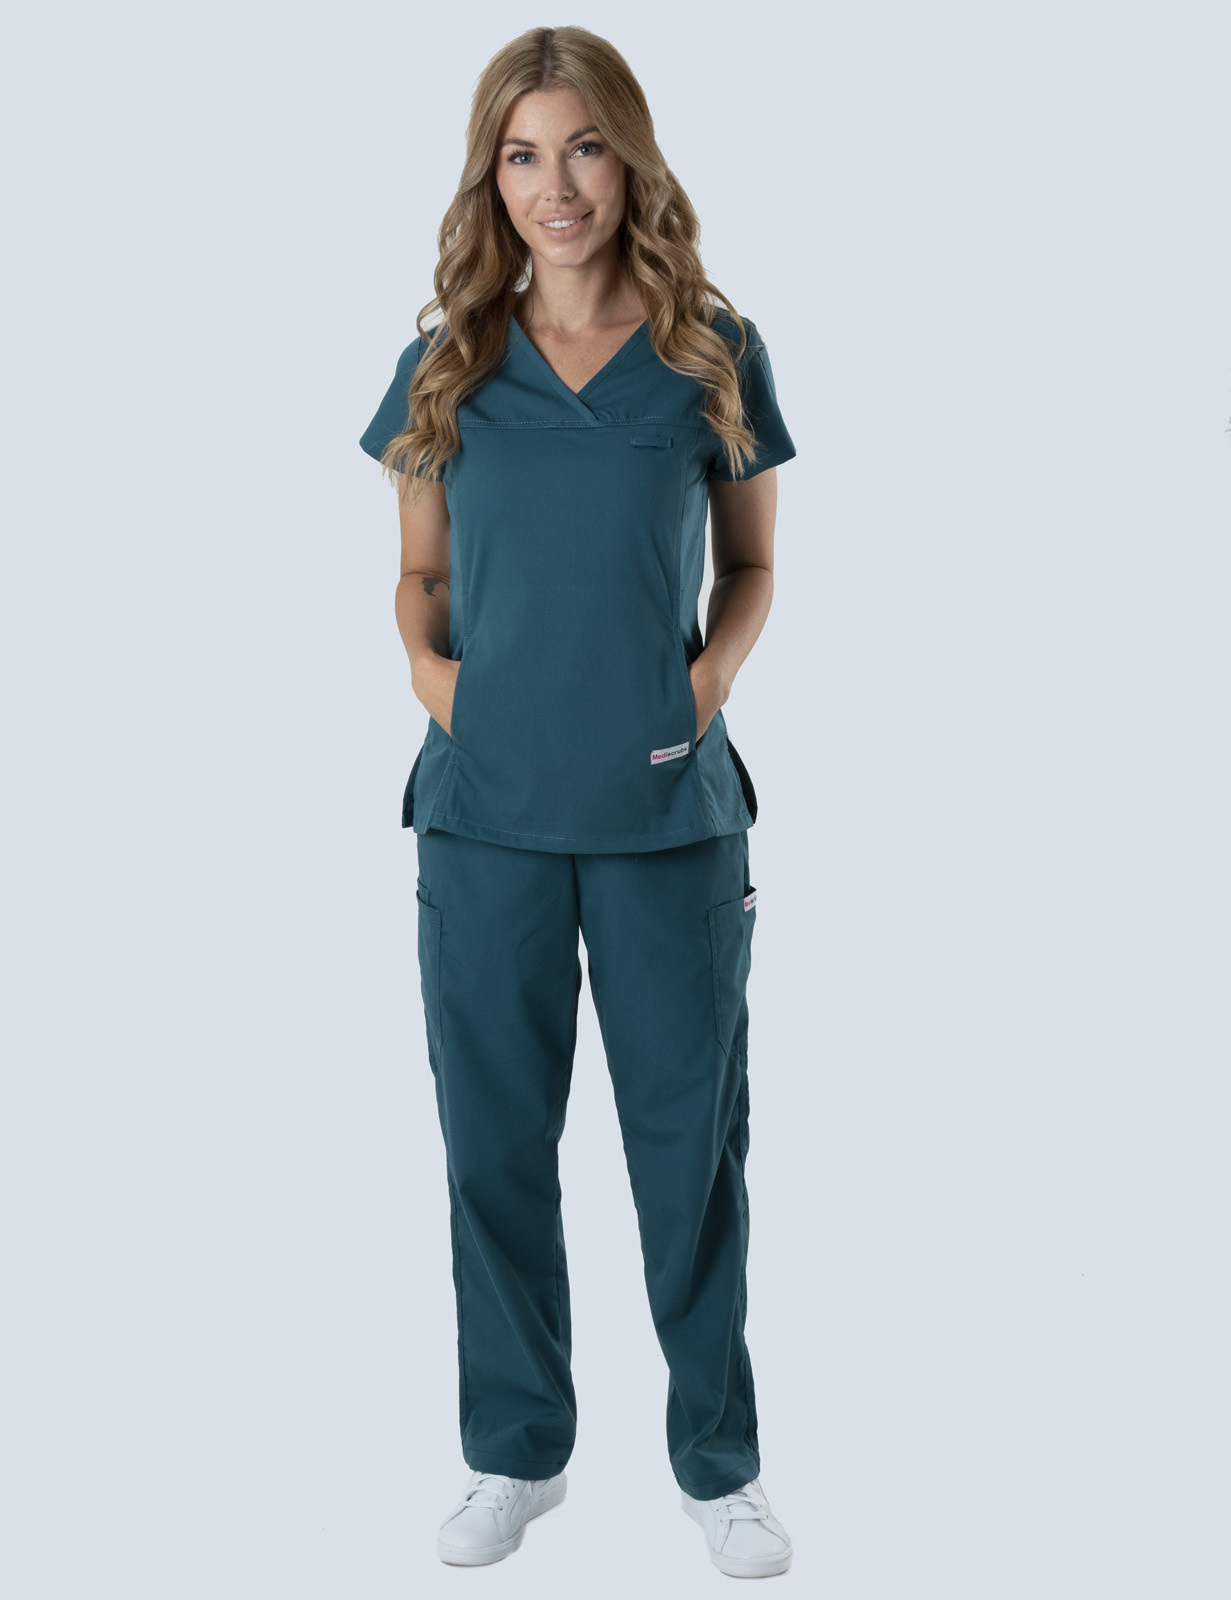 Tweed Health Super Clinic (Women's Fit Solid Scrub Top and Regular Pants in Caribbean incl Logos)